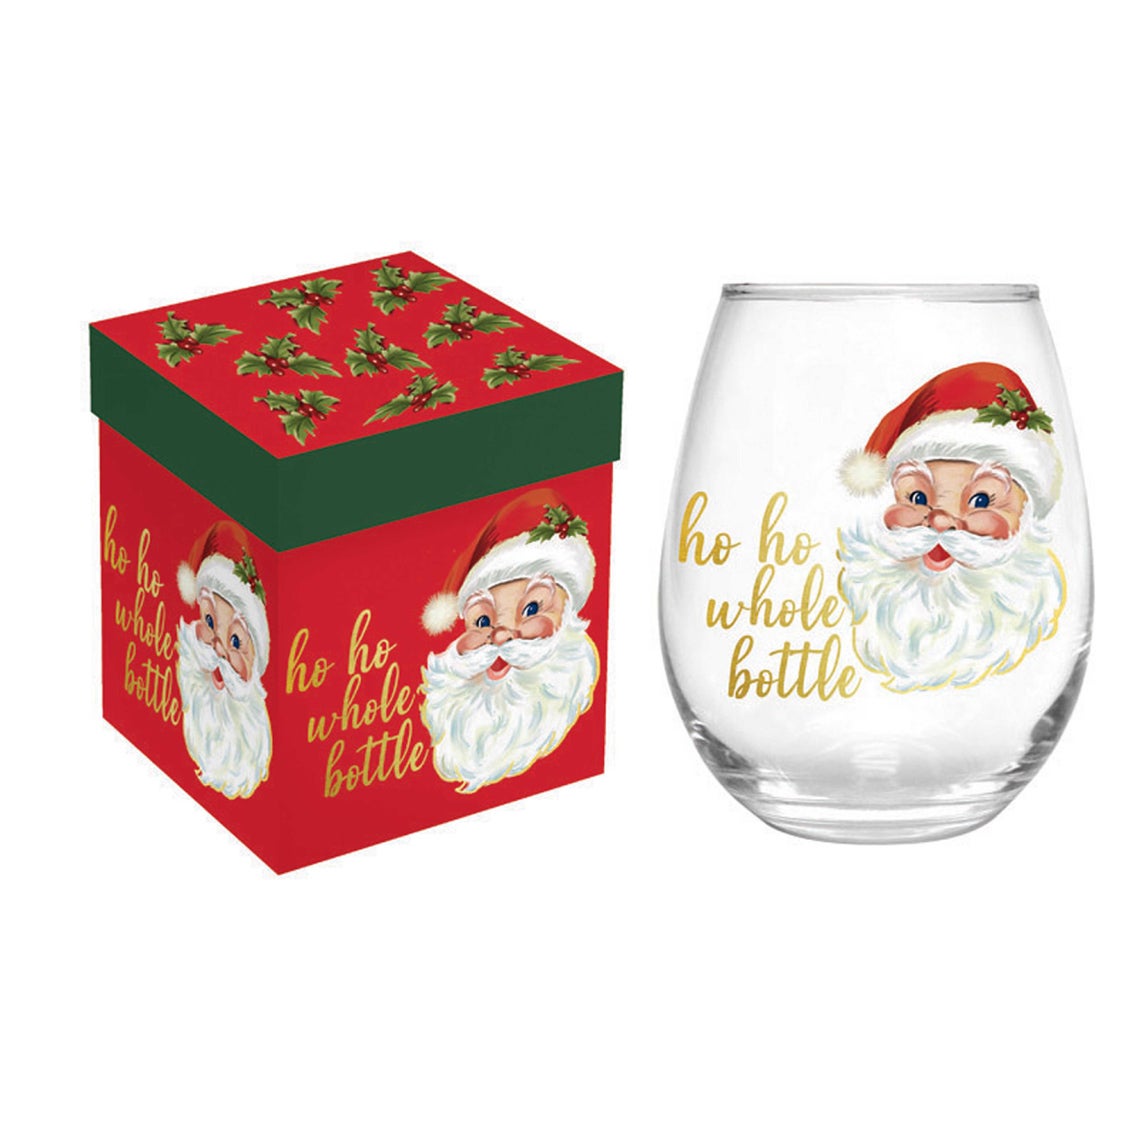 17oz Stemless Glass with Gift Box, Ho Ho Whole Bottle